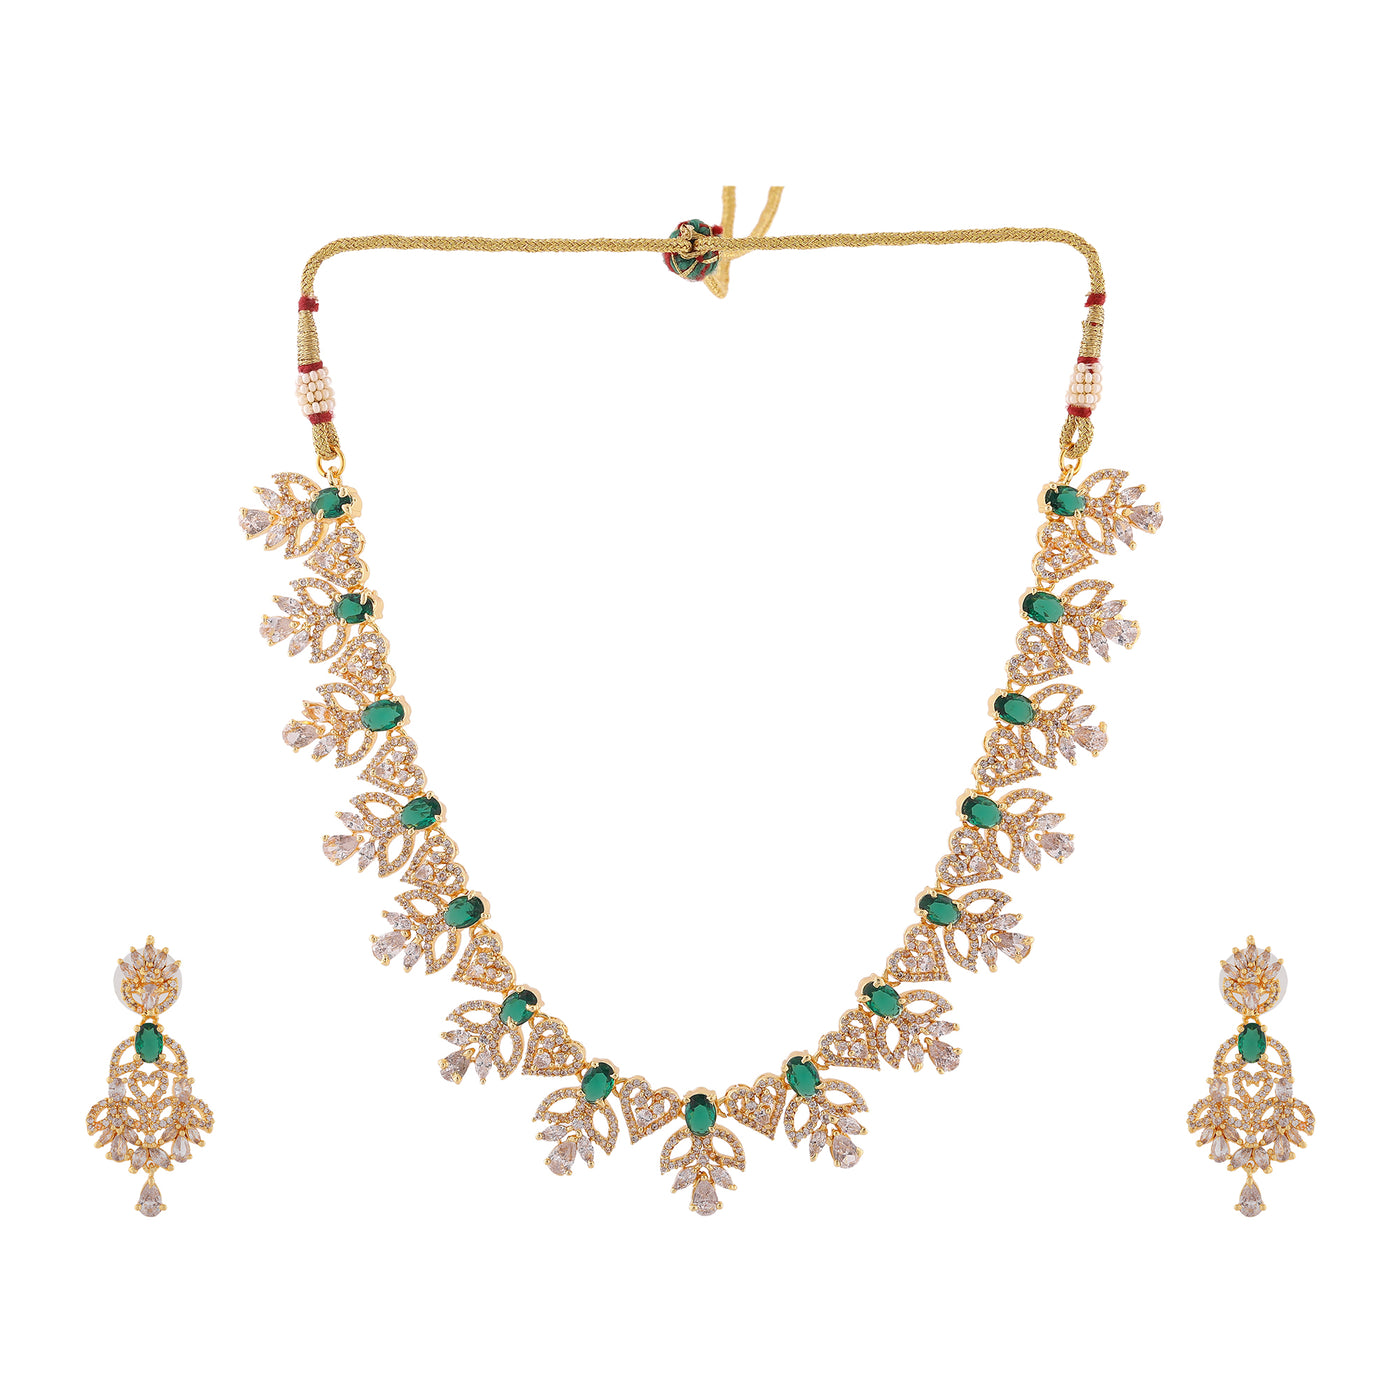 Estele Gold Plated CZ Dazzling Designer Necklace Set with Colored Stones for Women